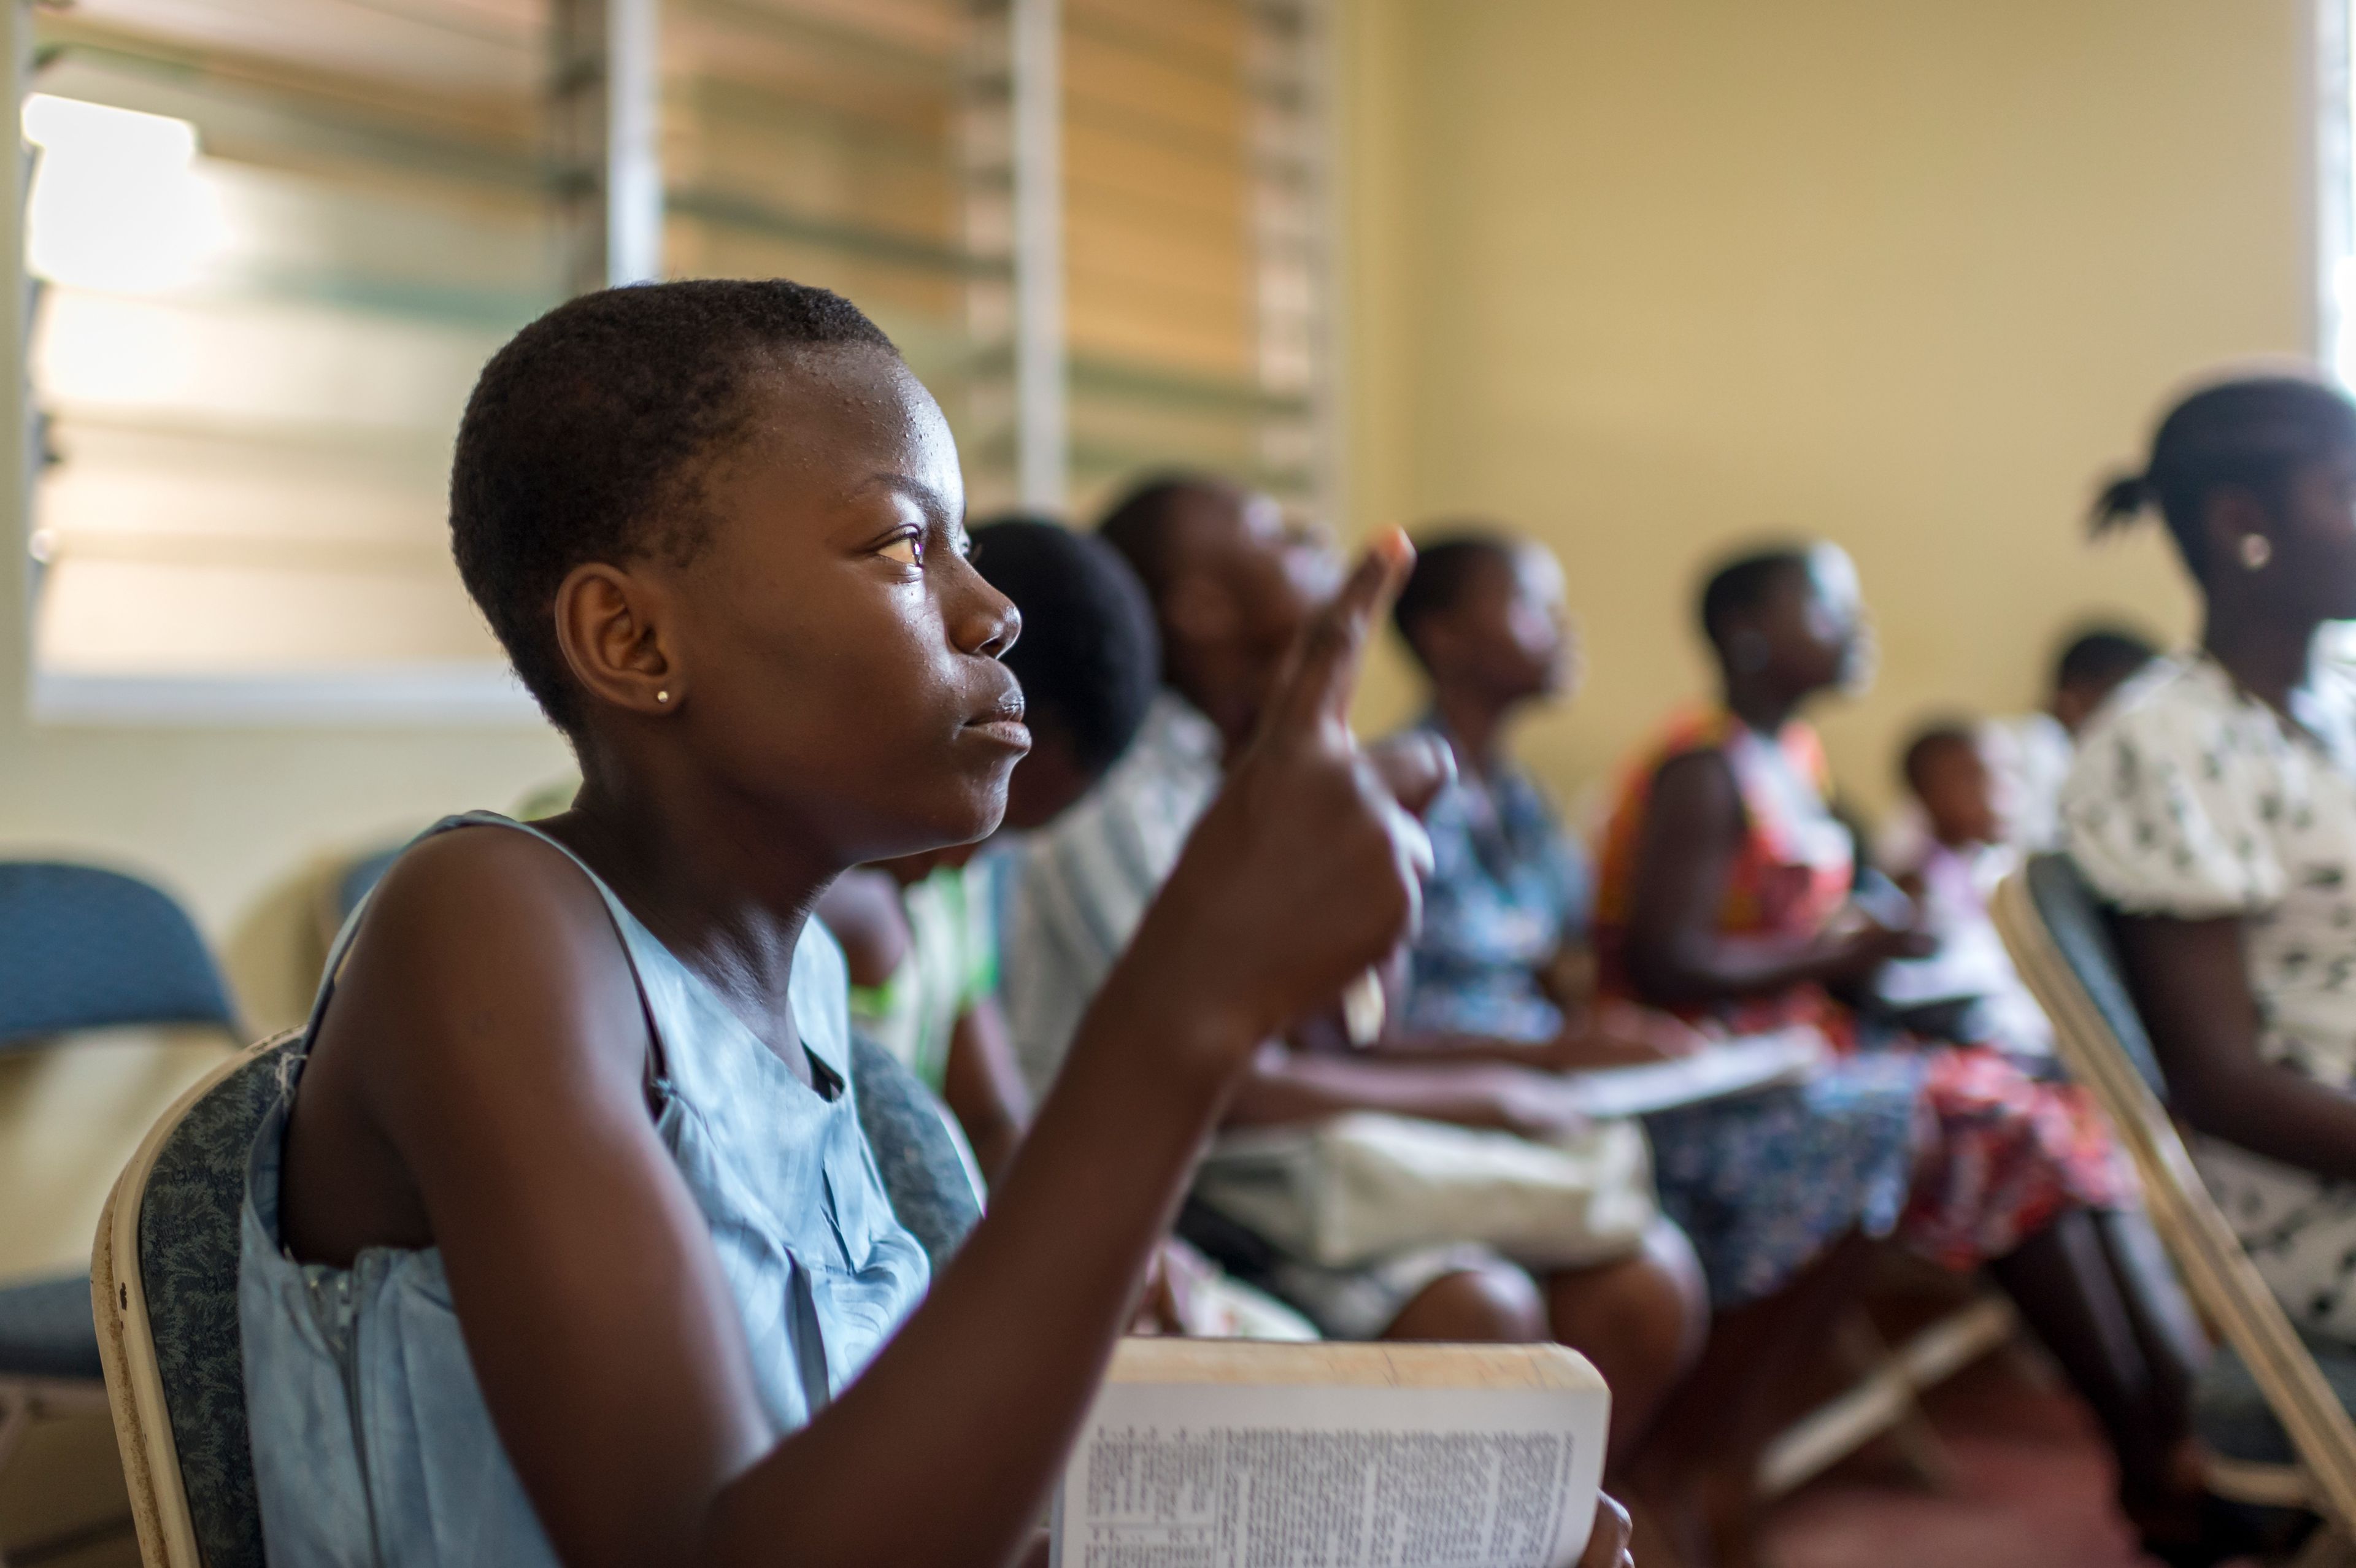 A young woman raises her hand during Sunday School.  